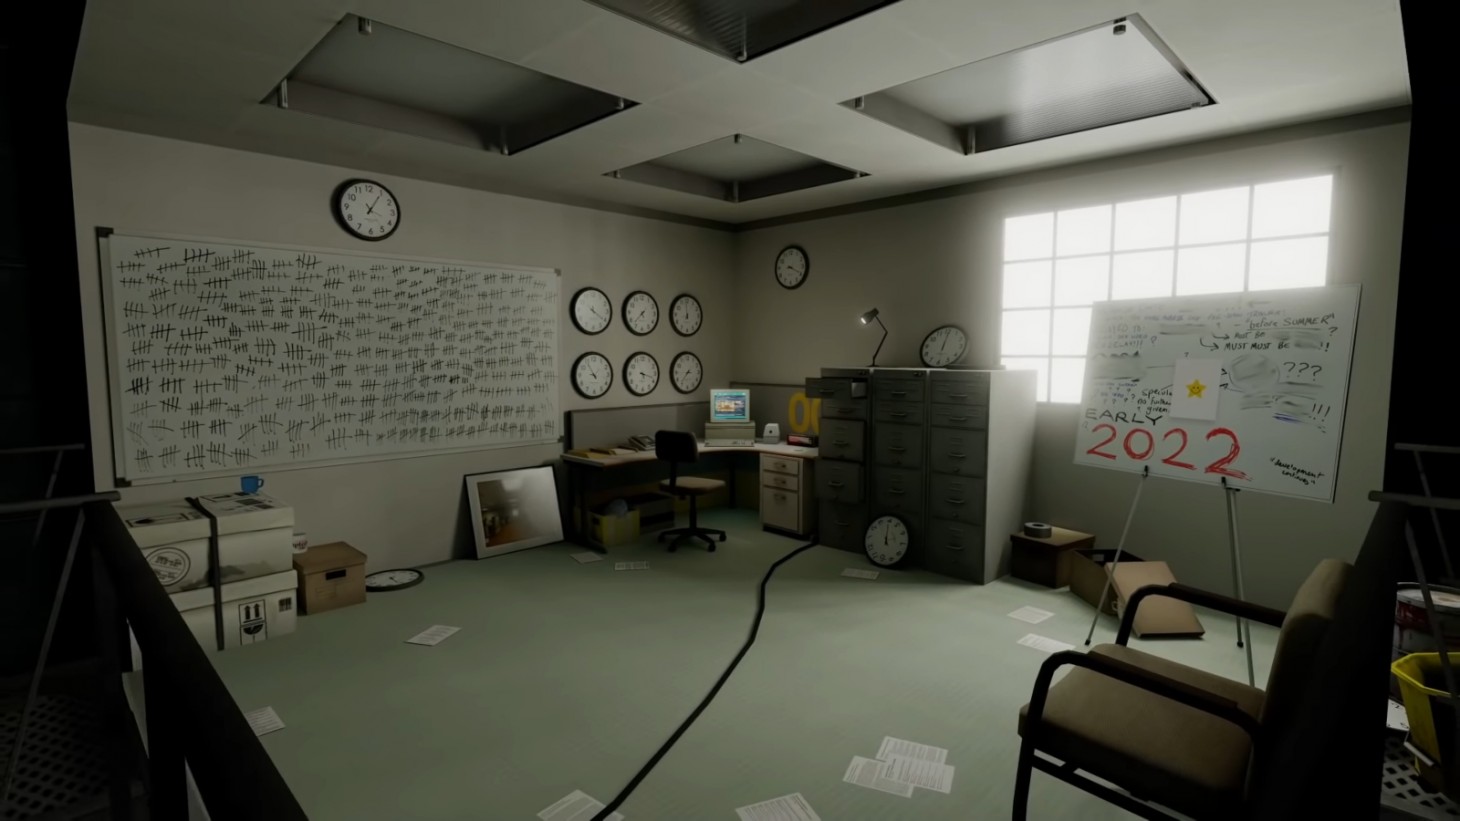 Stanley parable ultra. Stanley Parable Ultra Deluxe Стэнли. The Stanley Parable: Ultra Deluxe. The Stanley Parable Ultra Deluxe v.1.05 (2022). Ведро the Stanley Parable.